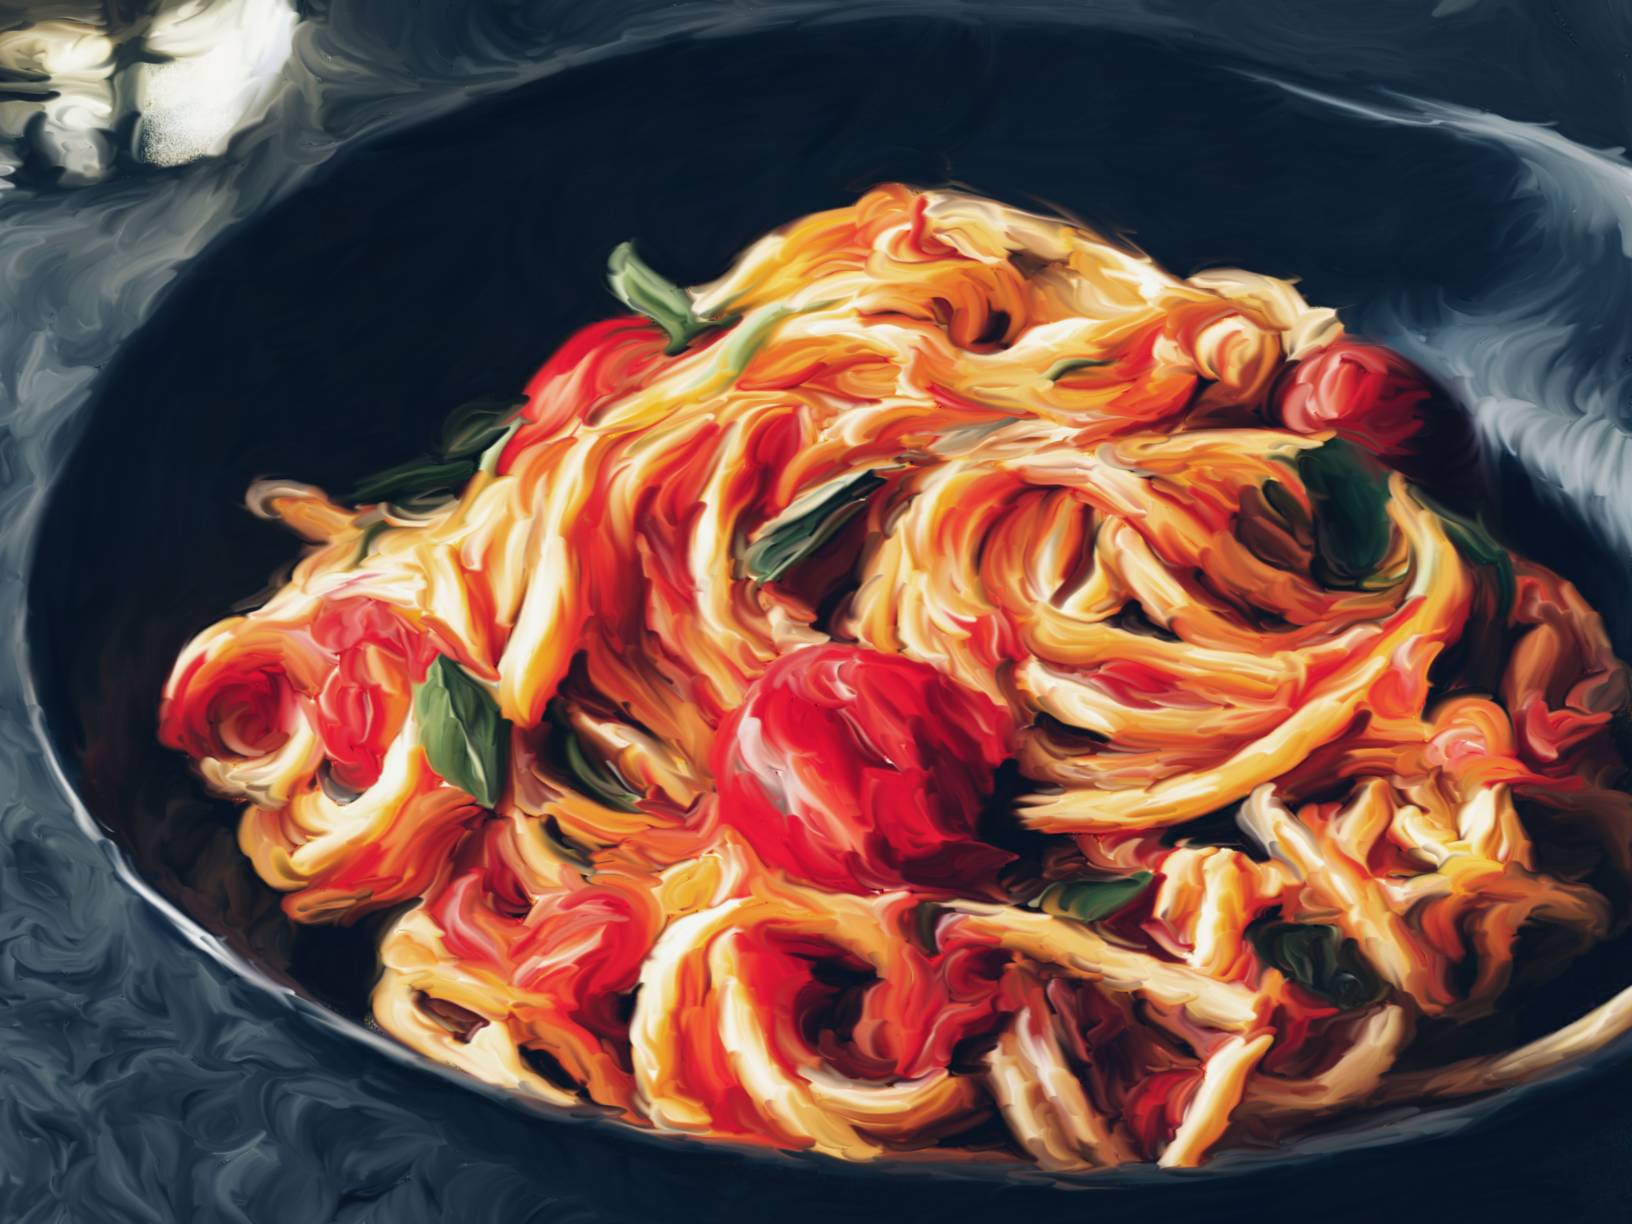 10 Mouthwatering and Uncomplicated Pasta Recipes for a Palatable Weeknight Dinner